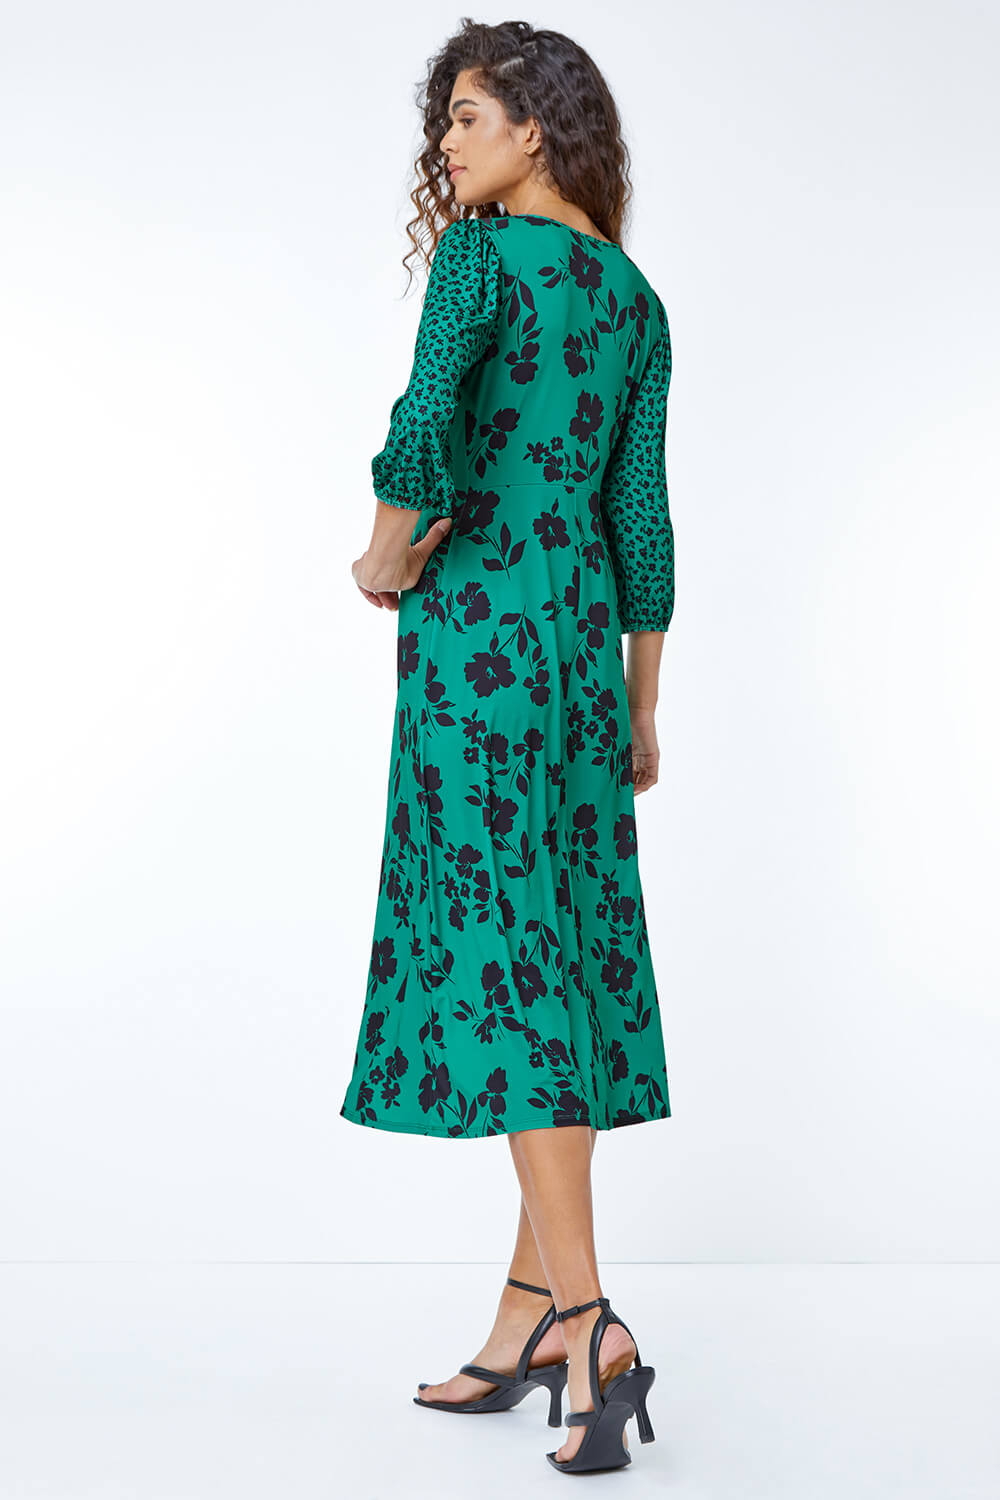 Green Floral Contrast Print Midi Dress, Image 3 of 5